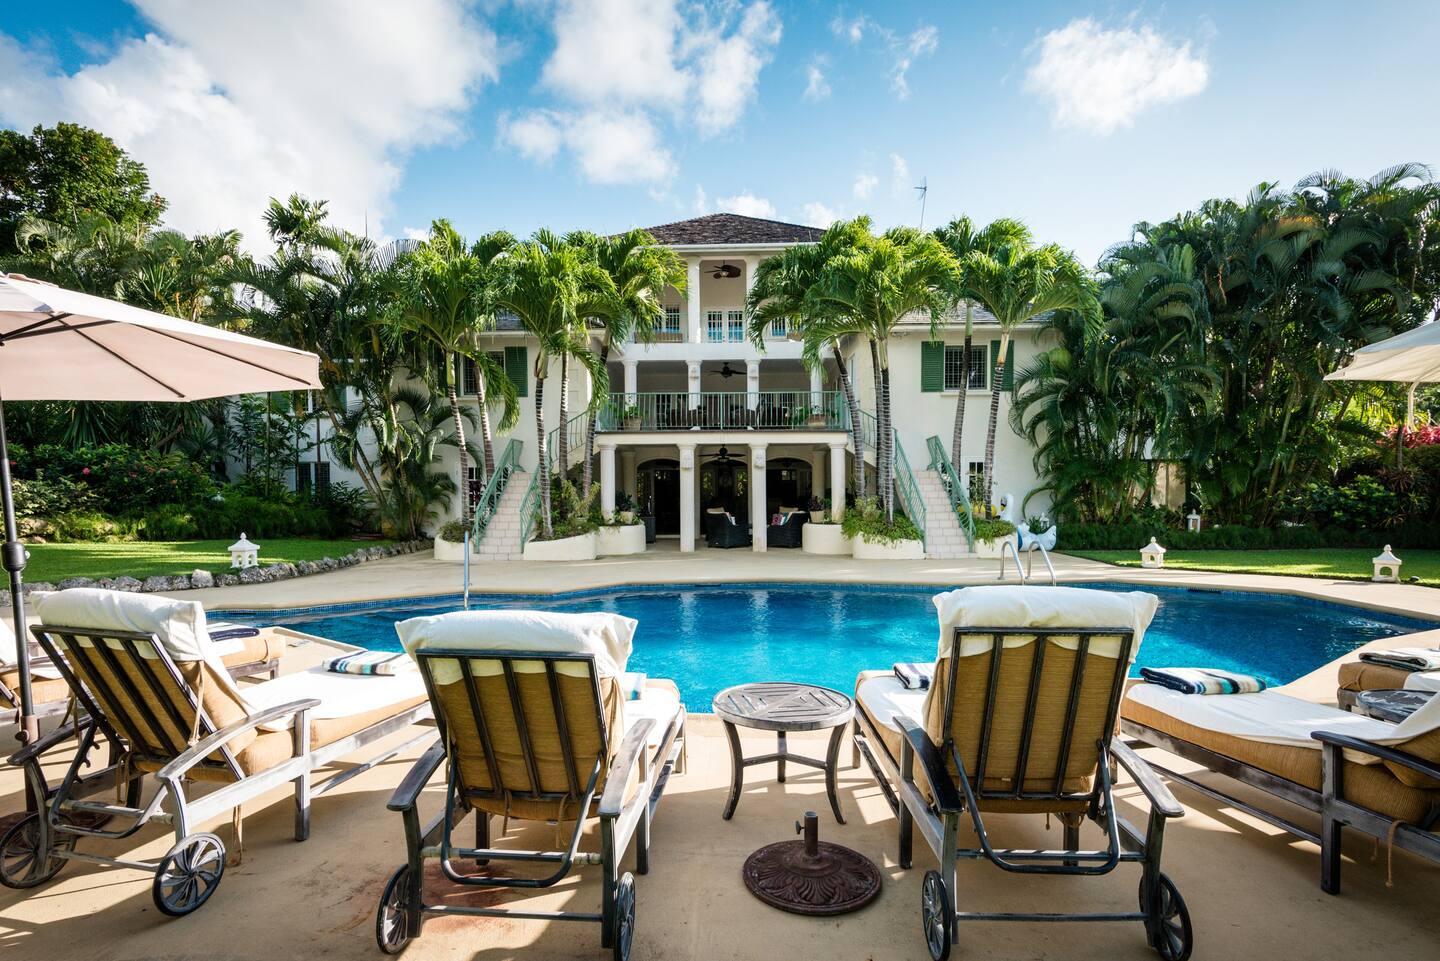 Villa Aliseo in Barbados is luxury at its finest! Set within former Bajan plantation grounds, and part of the upscale Sandy Lane Estate